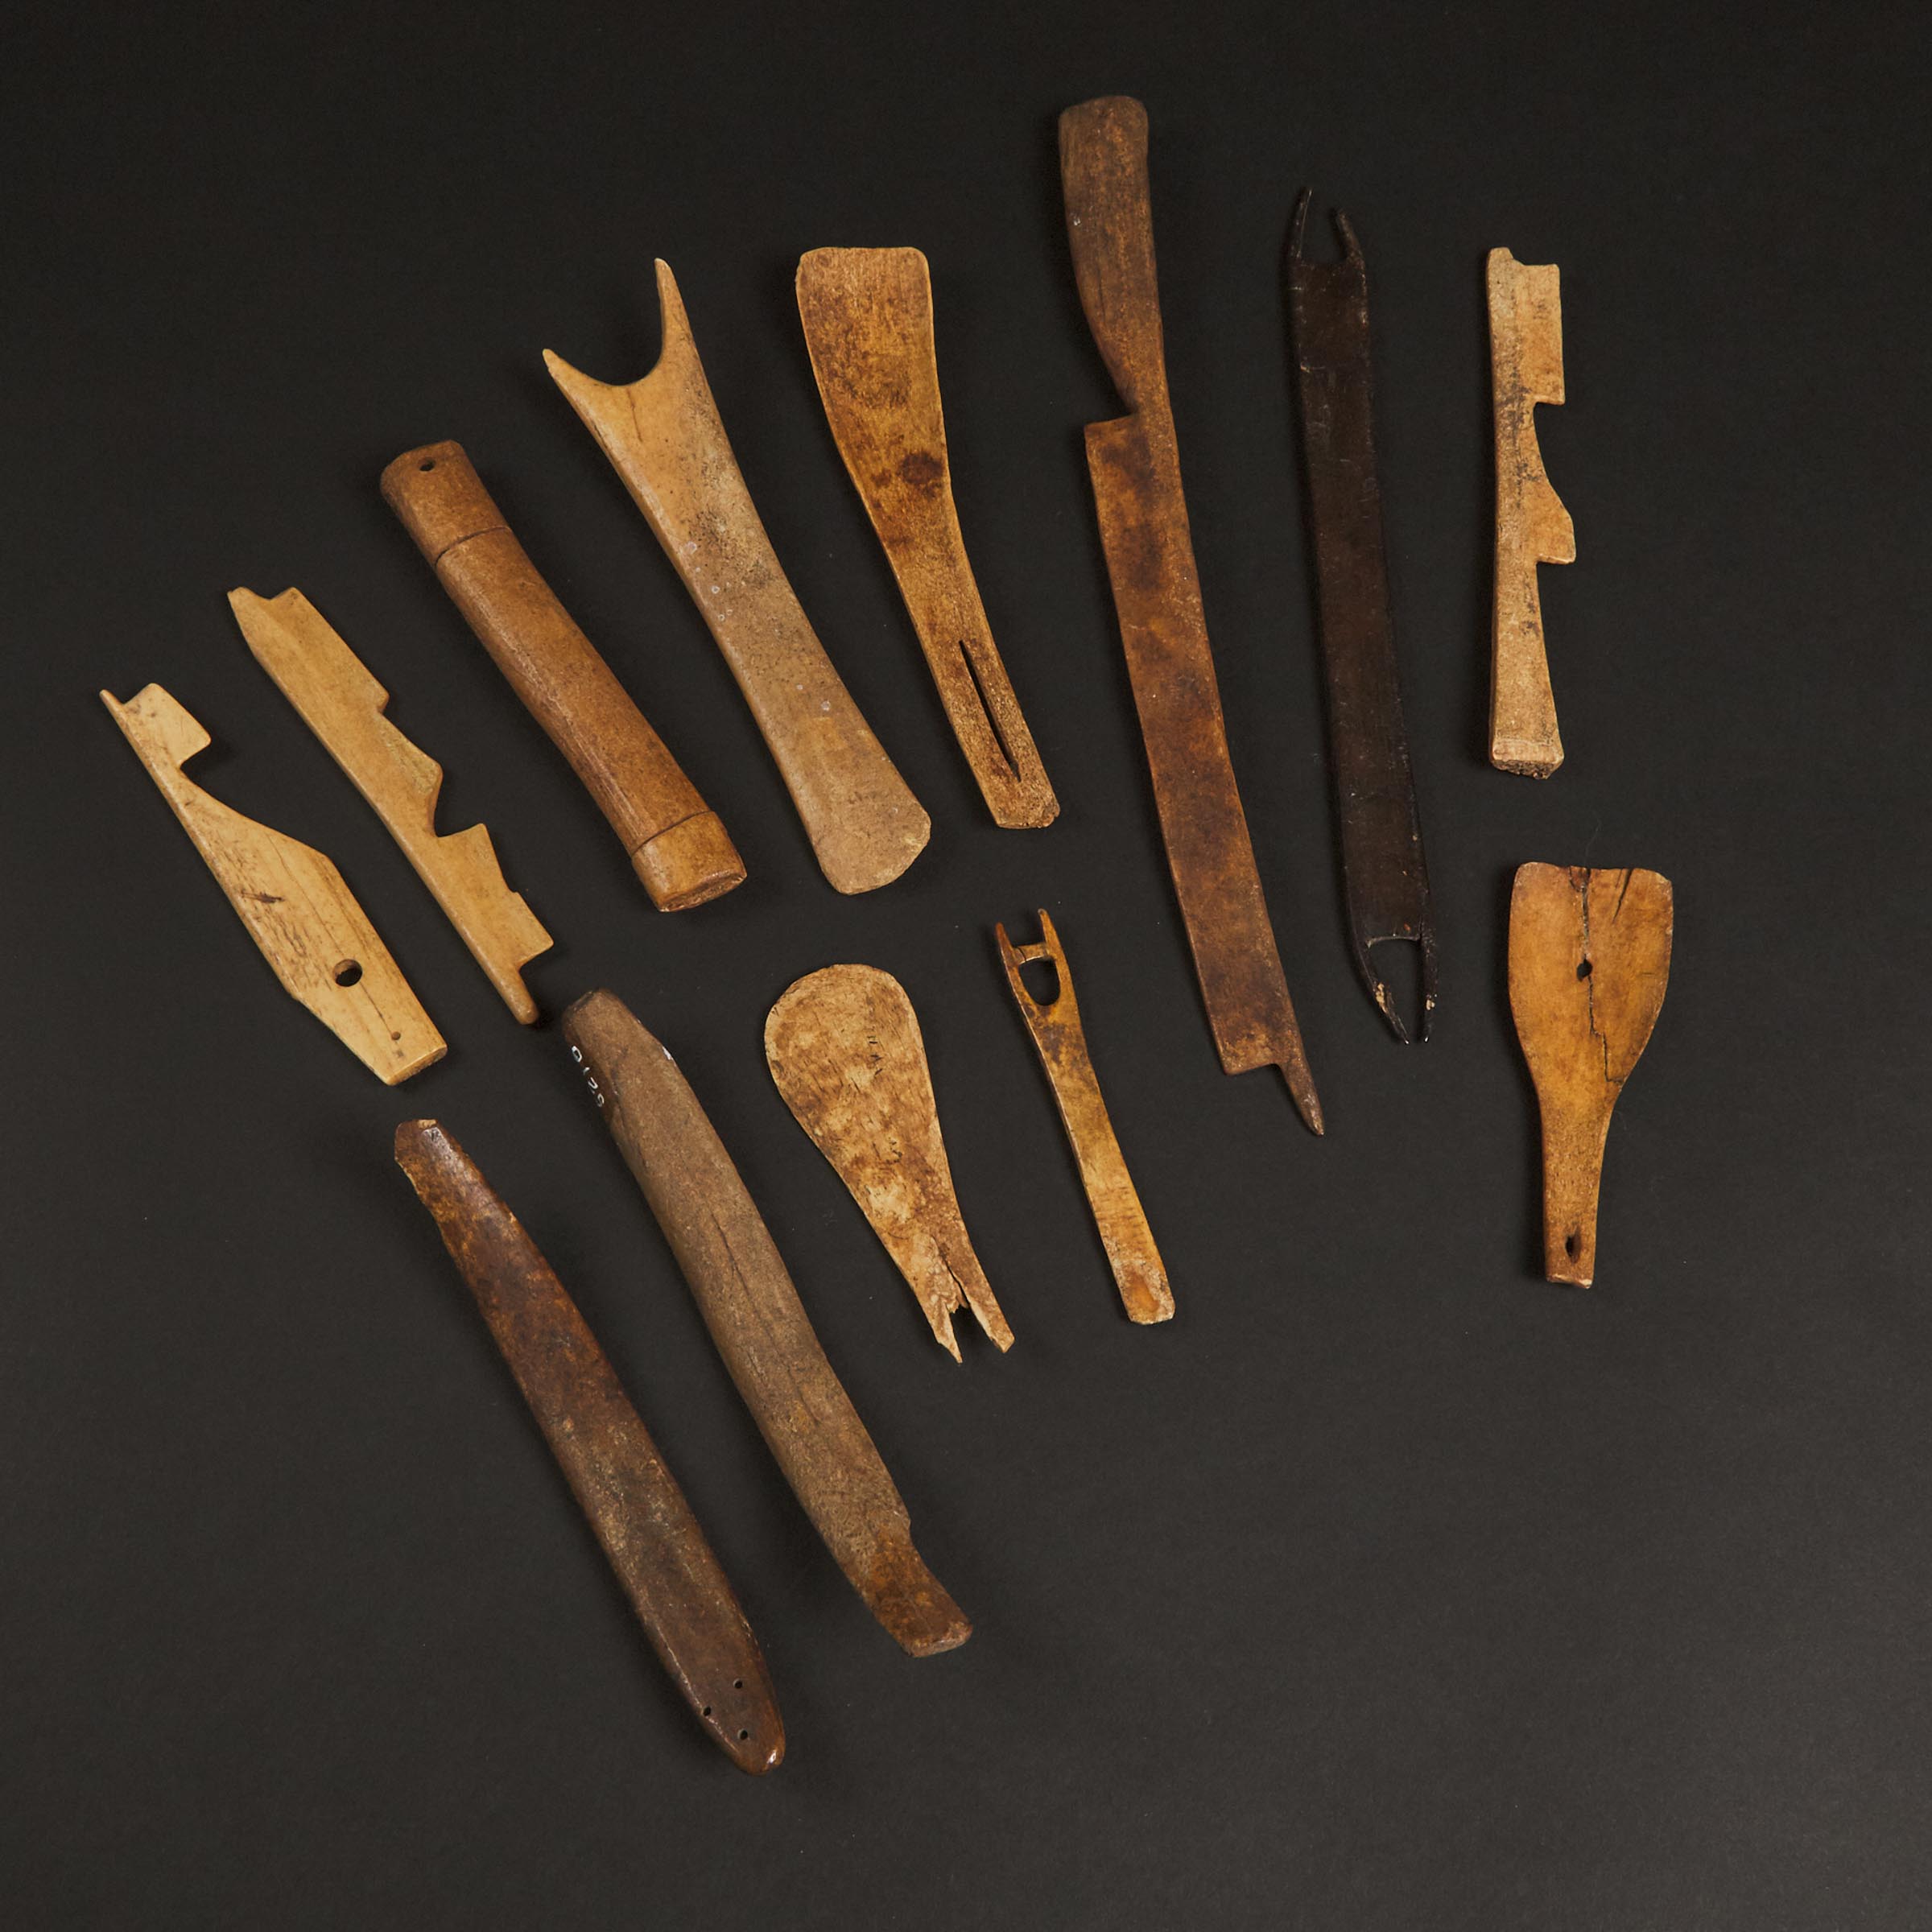 Thirteen Implements, Inupiat, Sitaisaq (Brevig Mission), and Shishmaref, Pre-1900